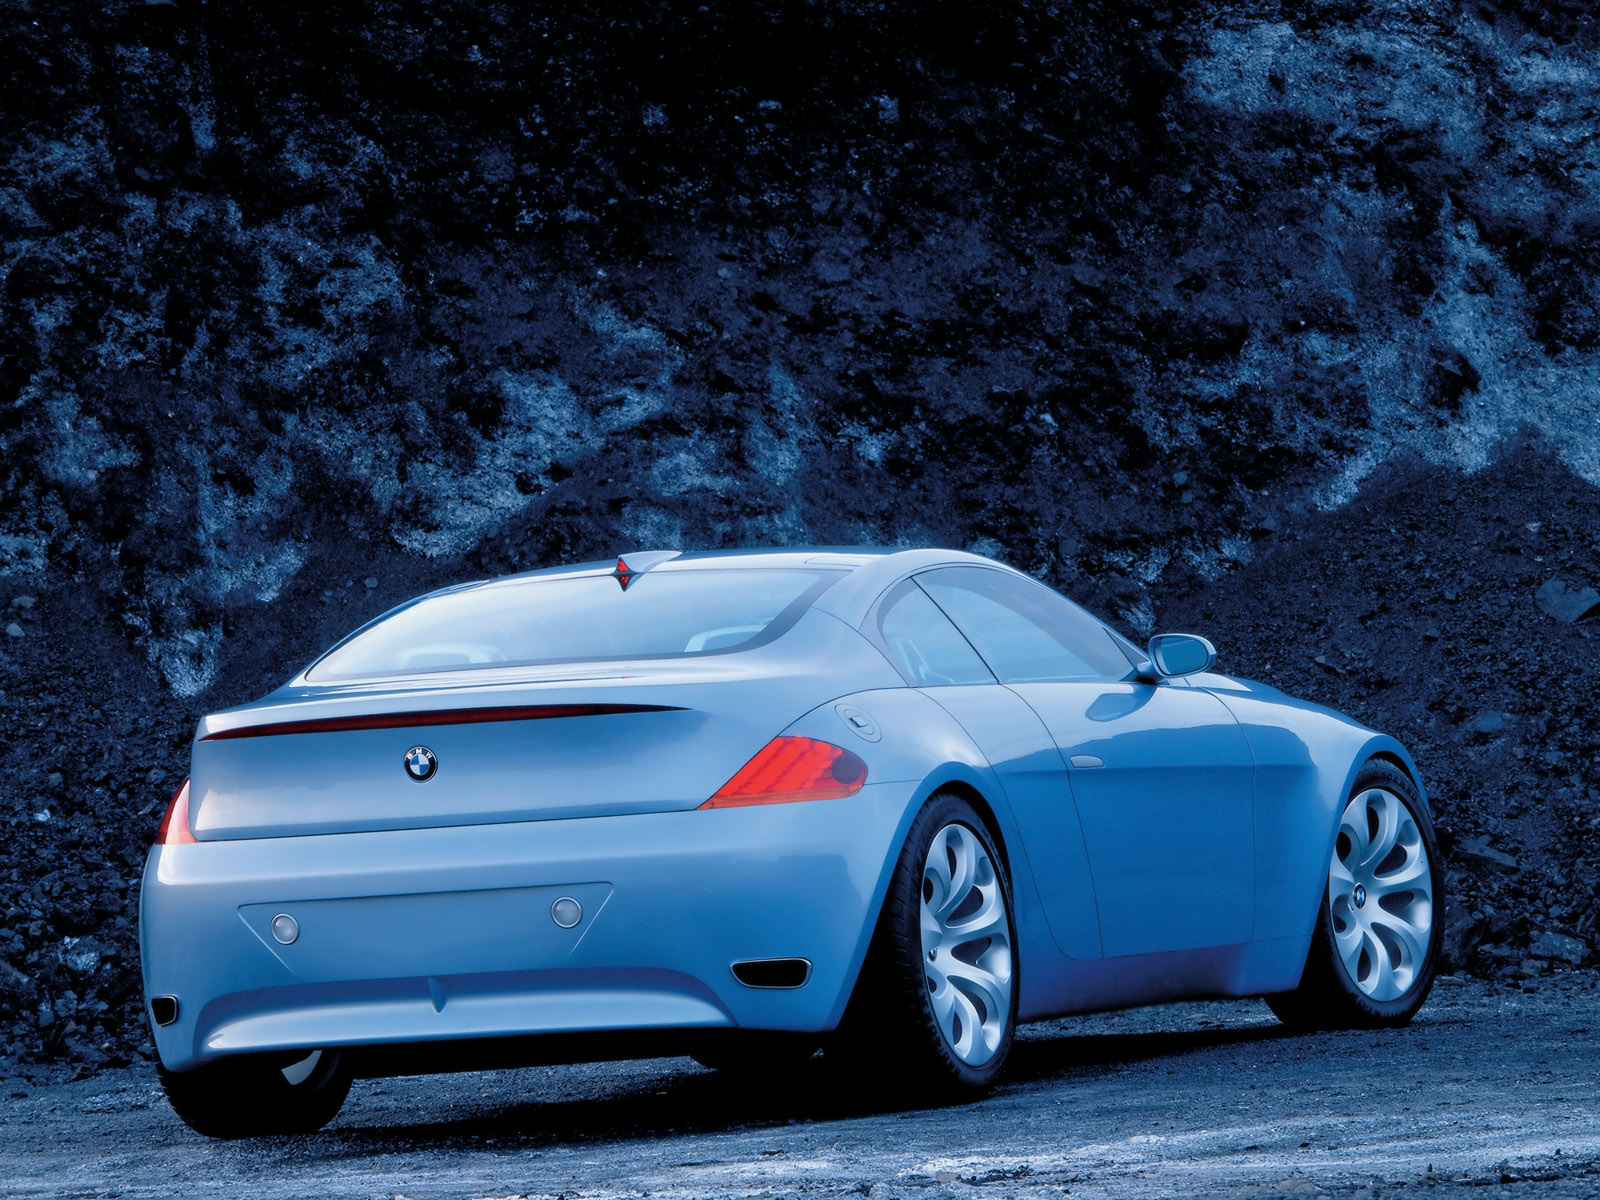 BMW Z9 wallpapers and images - download wallpapers, pictures, photos